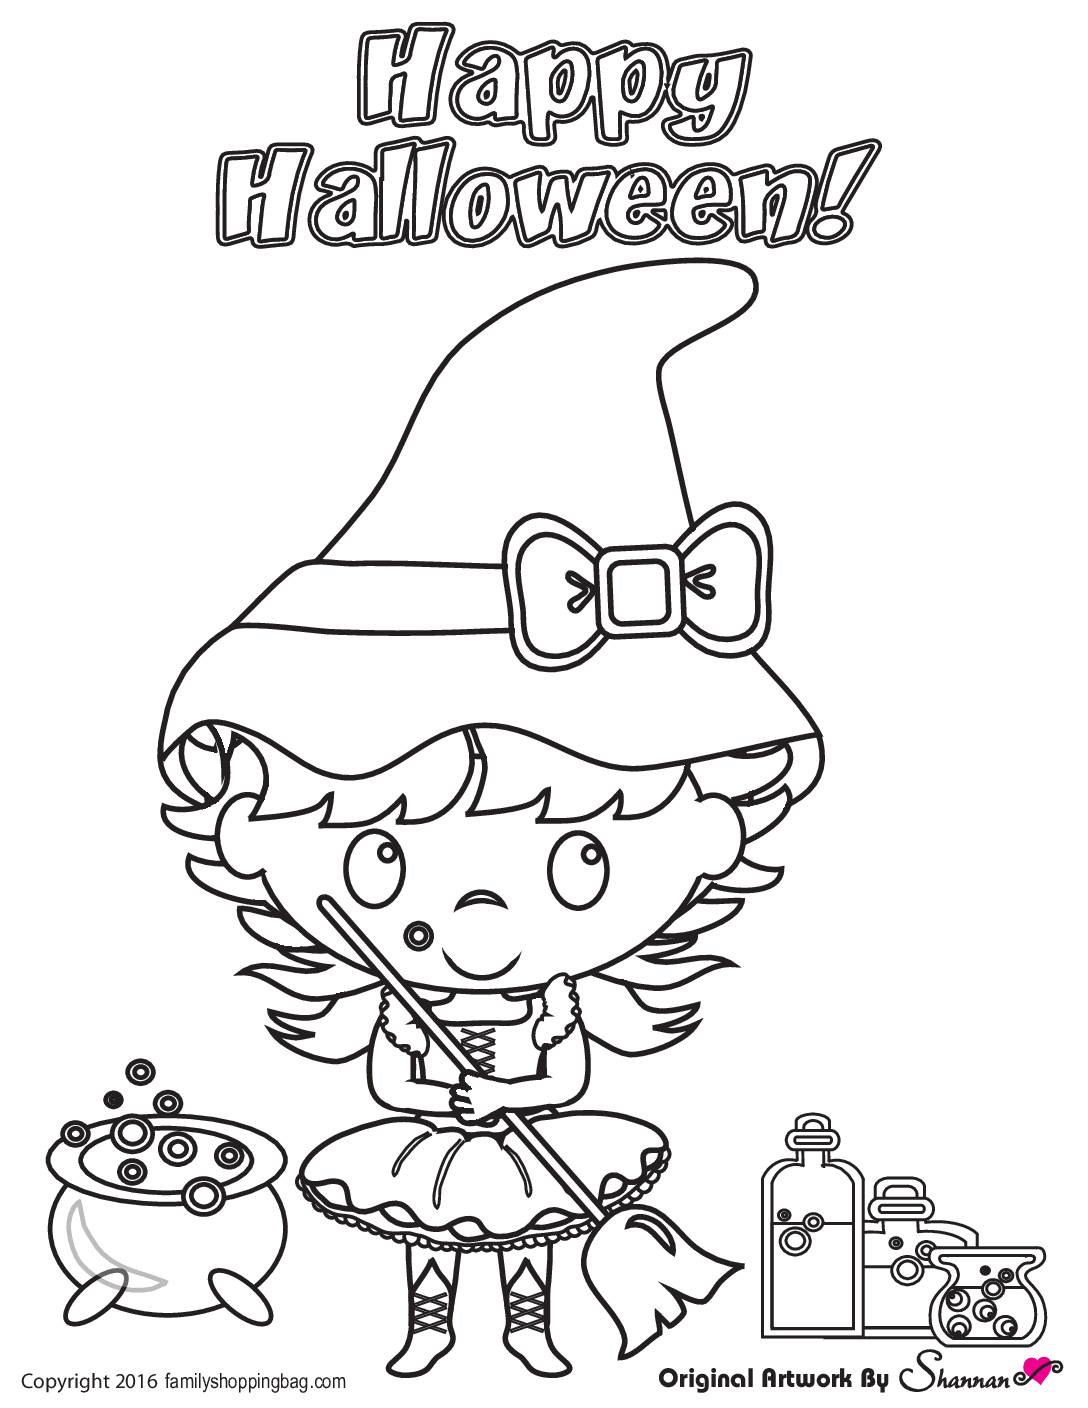 Halloween Coloring Page 3 Coloring Pages